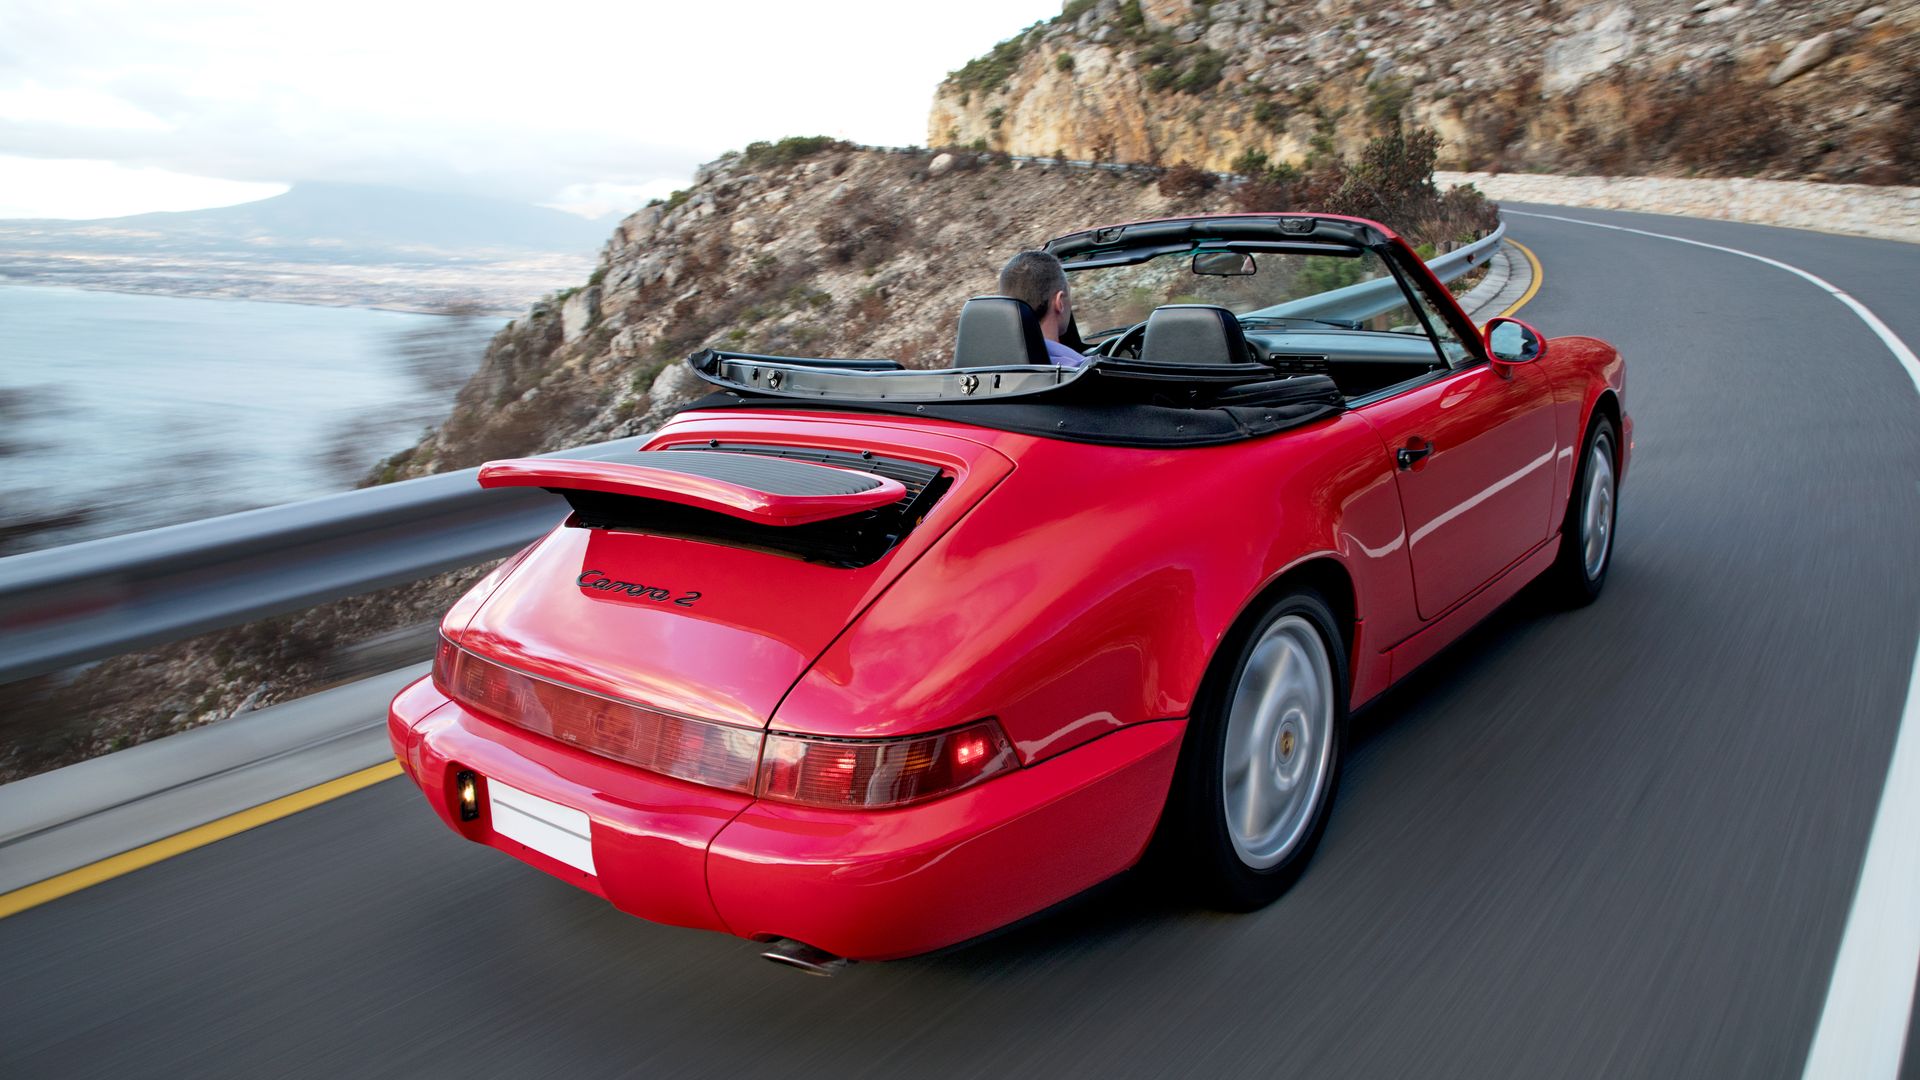 Photo of a red Porsche on a winding road overlooking the ocean